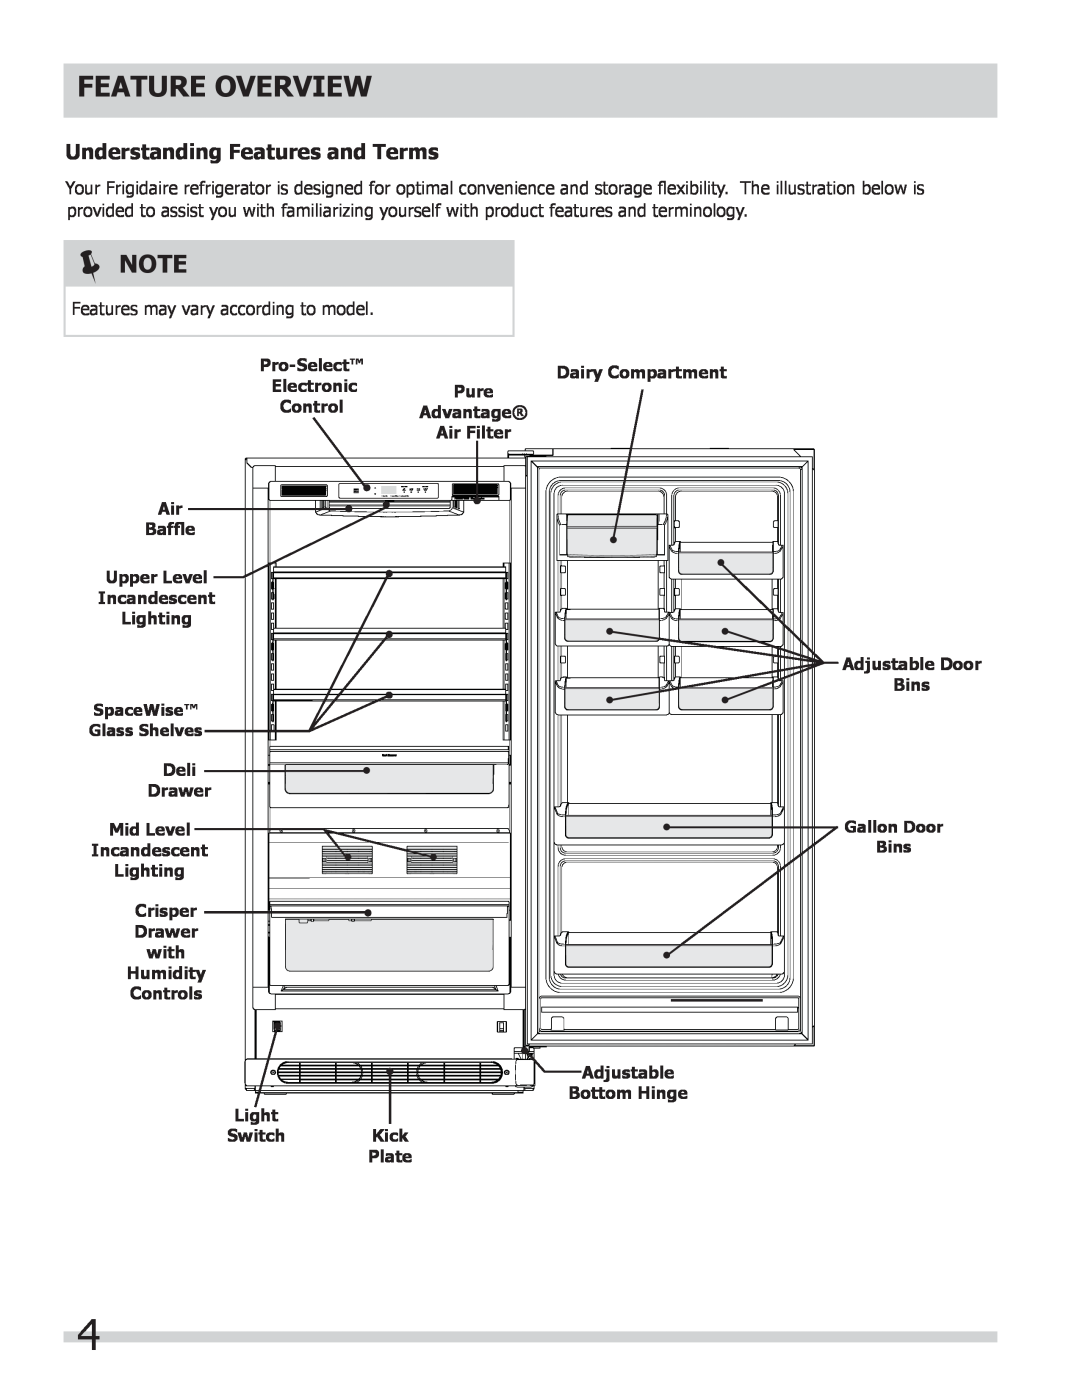 Frigidaire 297298700, FPRH19D7LF manual Feature Overview,  Note, Understanding Features and Terms 